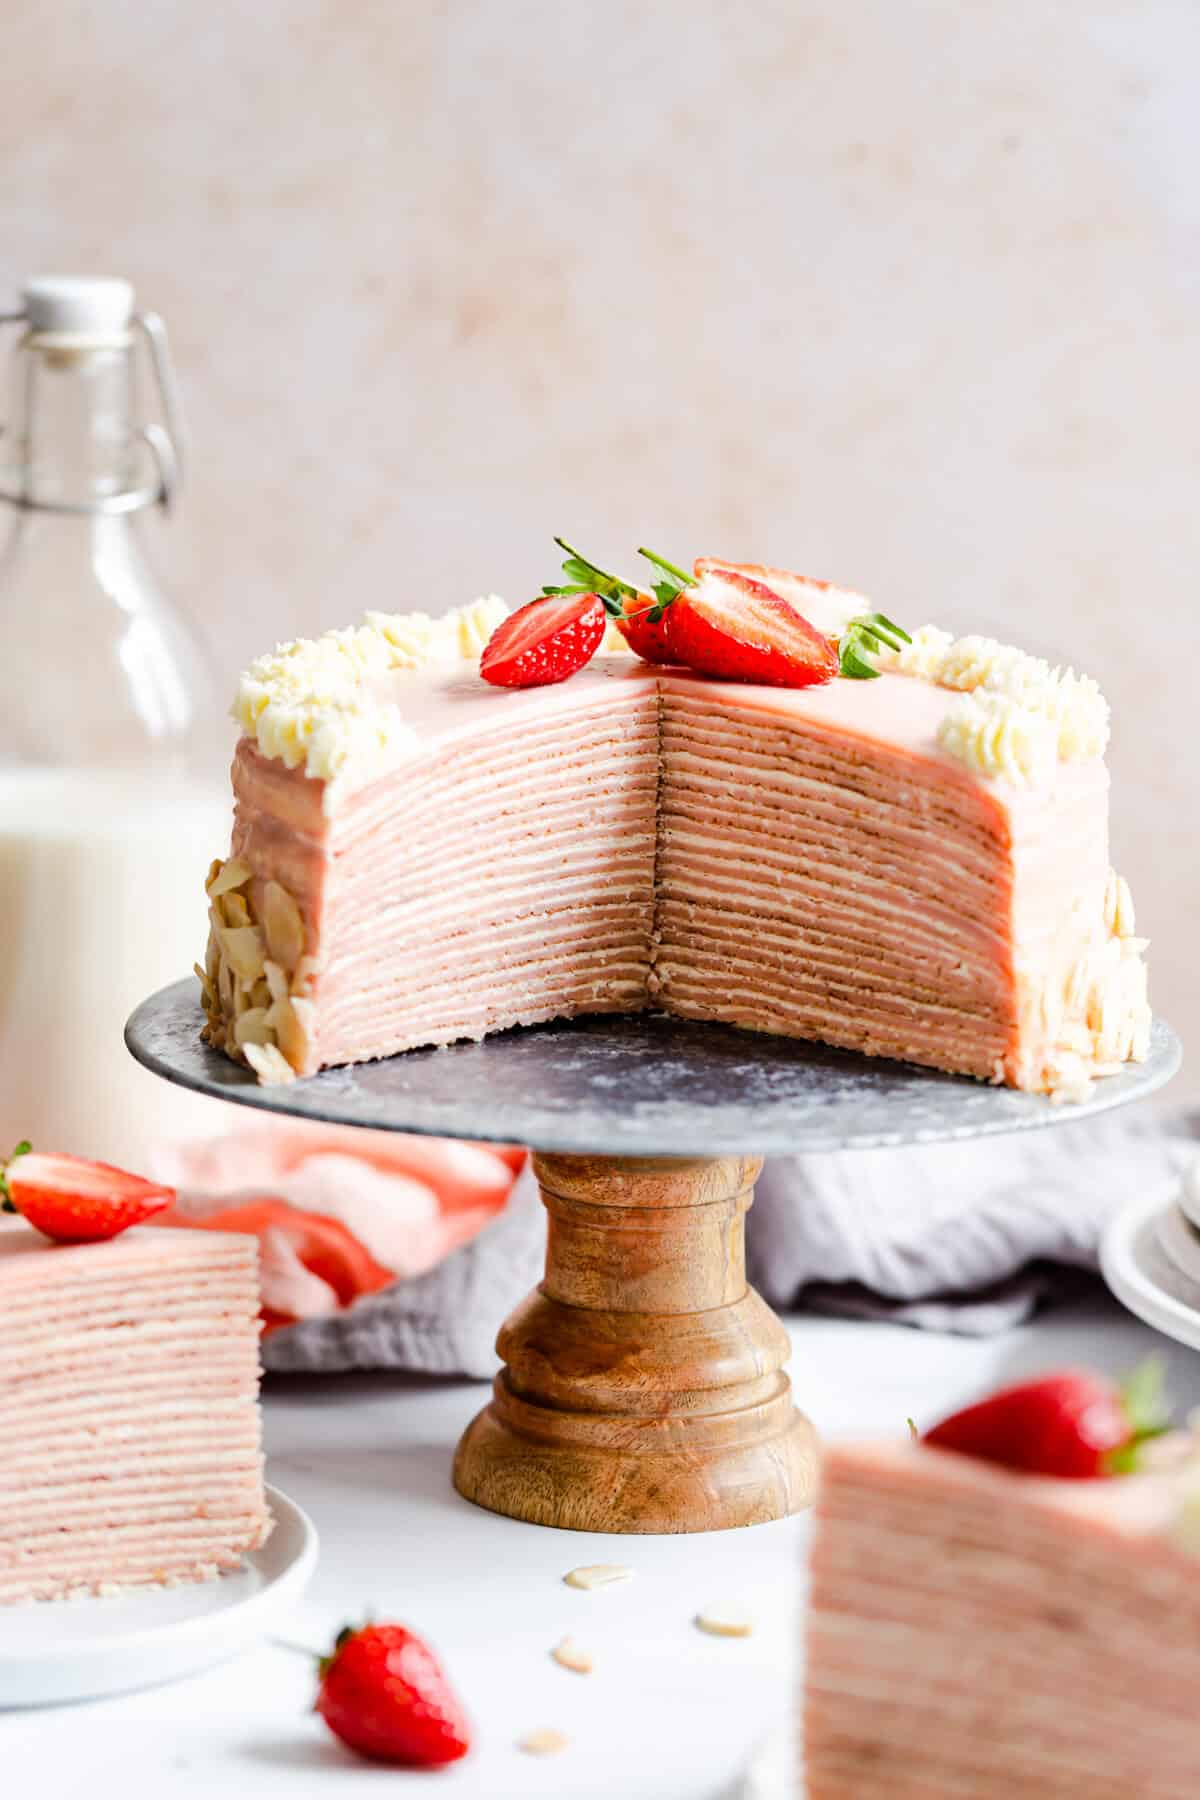 straight ahead shot of a strawberry crepe cake with couple of slices cut out revealing its inside